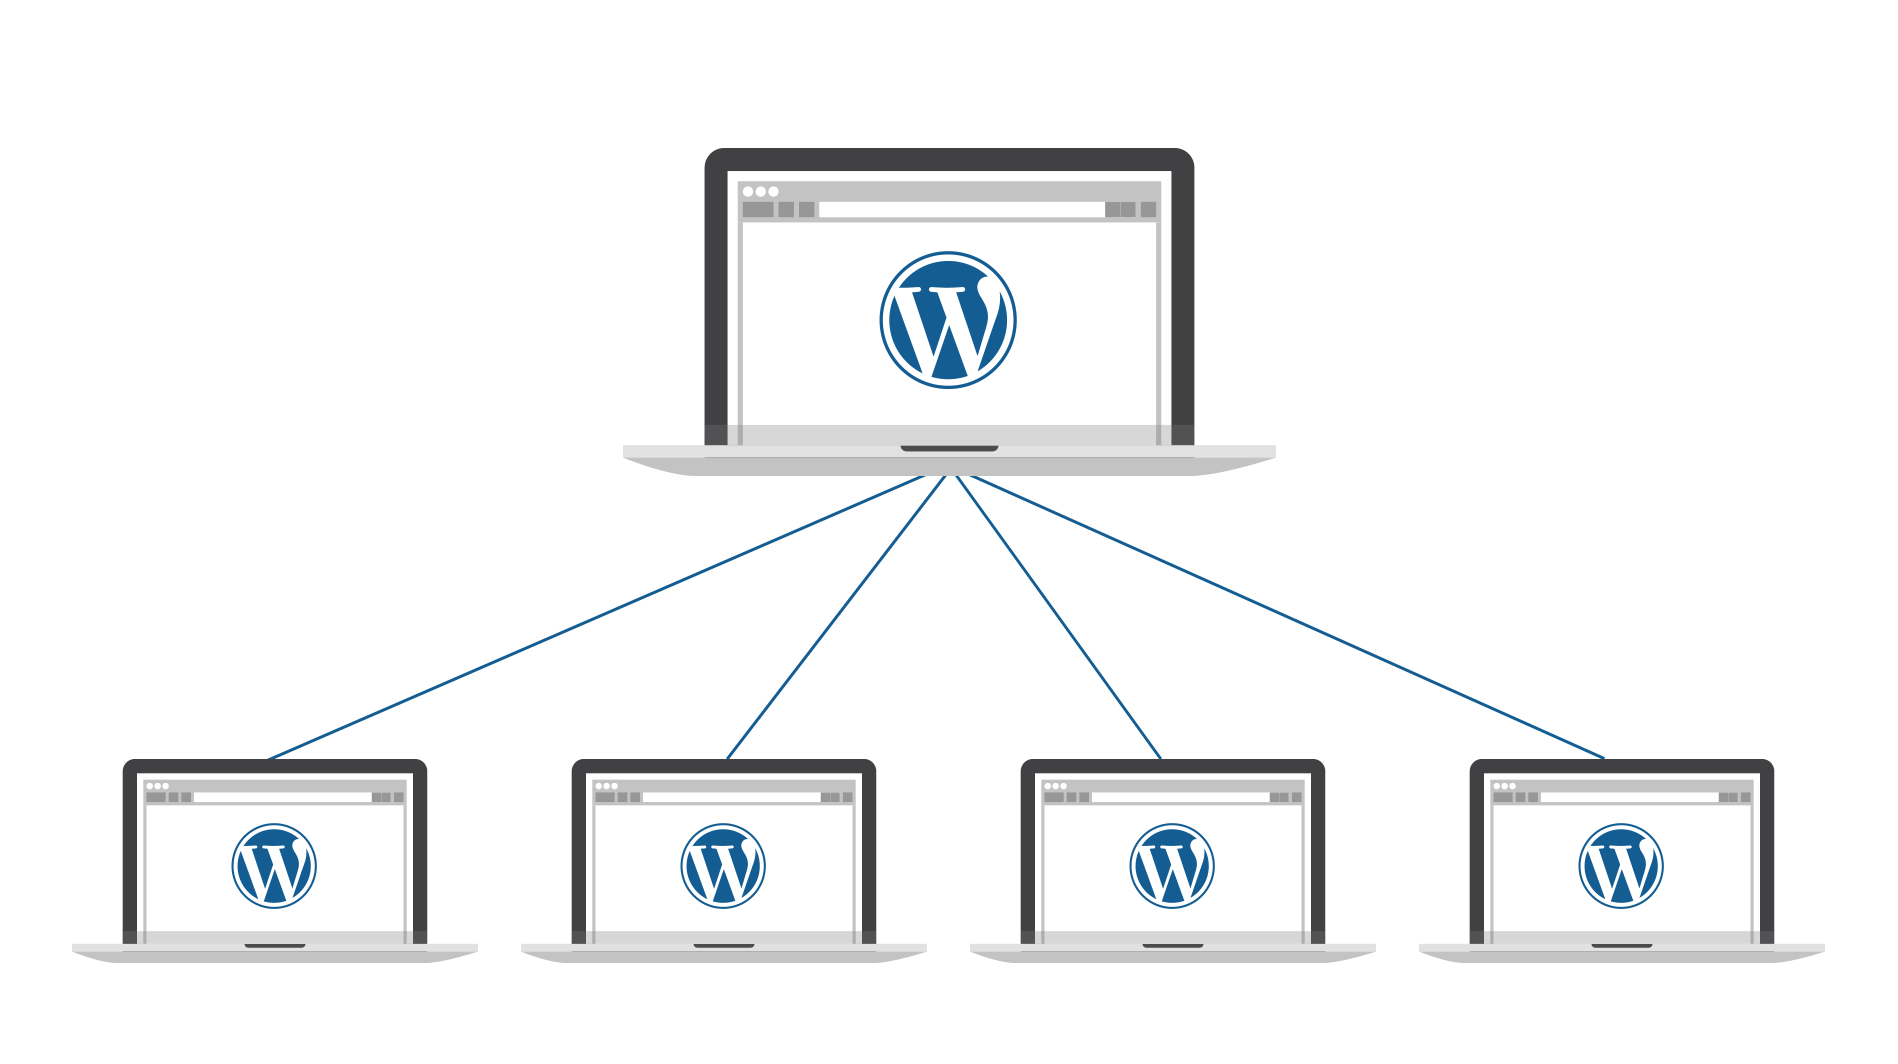 How To Enable Multisite Network in WordPress